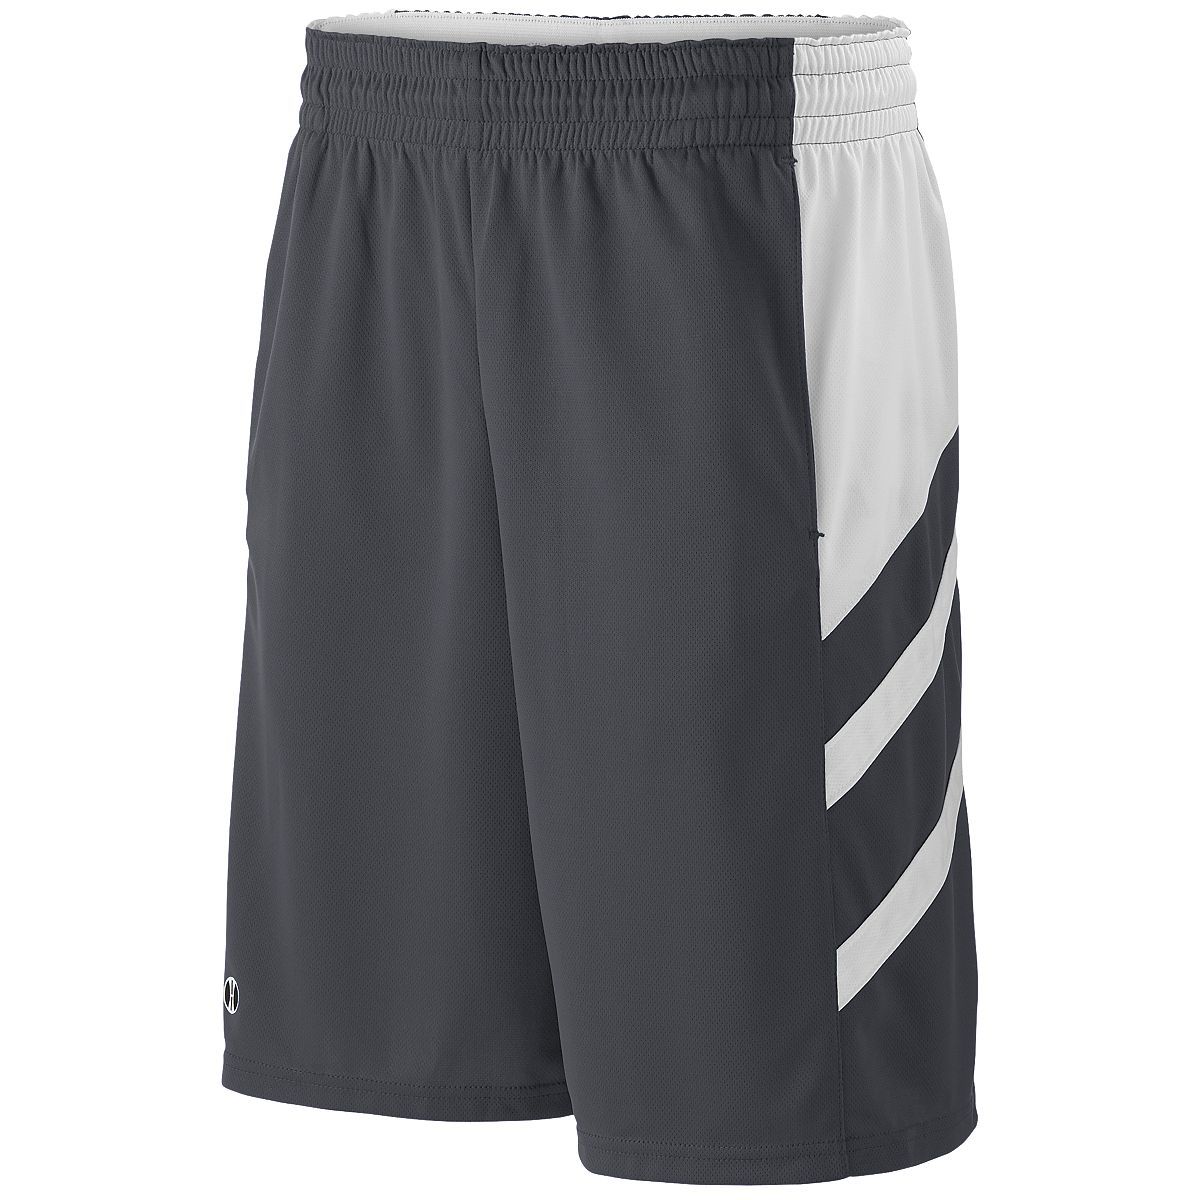 Holloway Helium Shorts in Carbon/White  -Part of the Adult, Adult-Shorts, Holloway product lines at KanaleyCreations.com